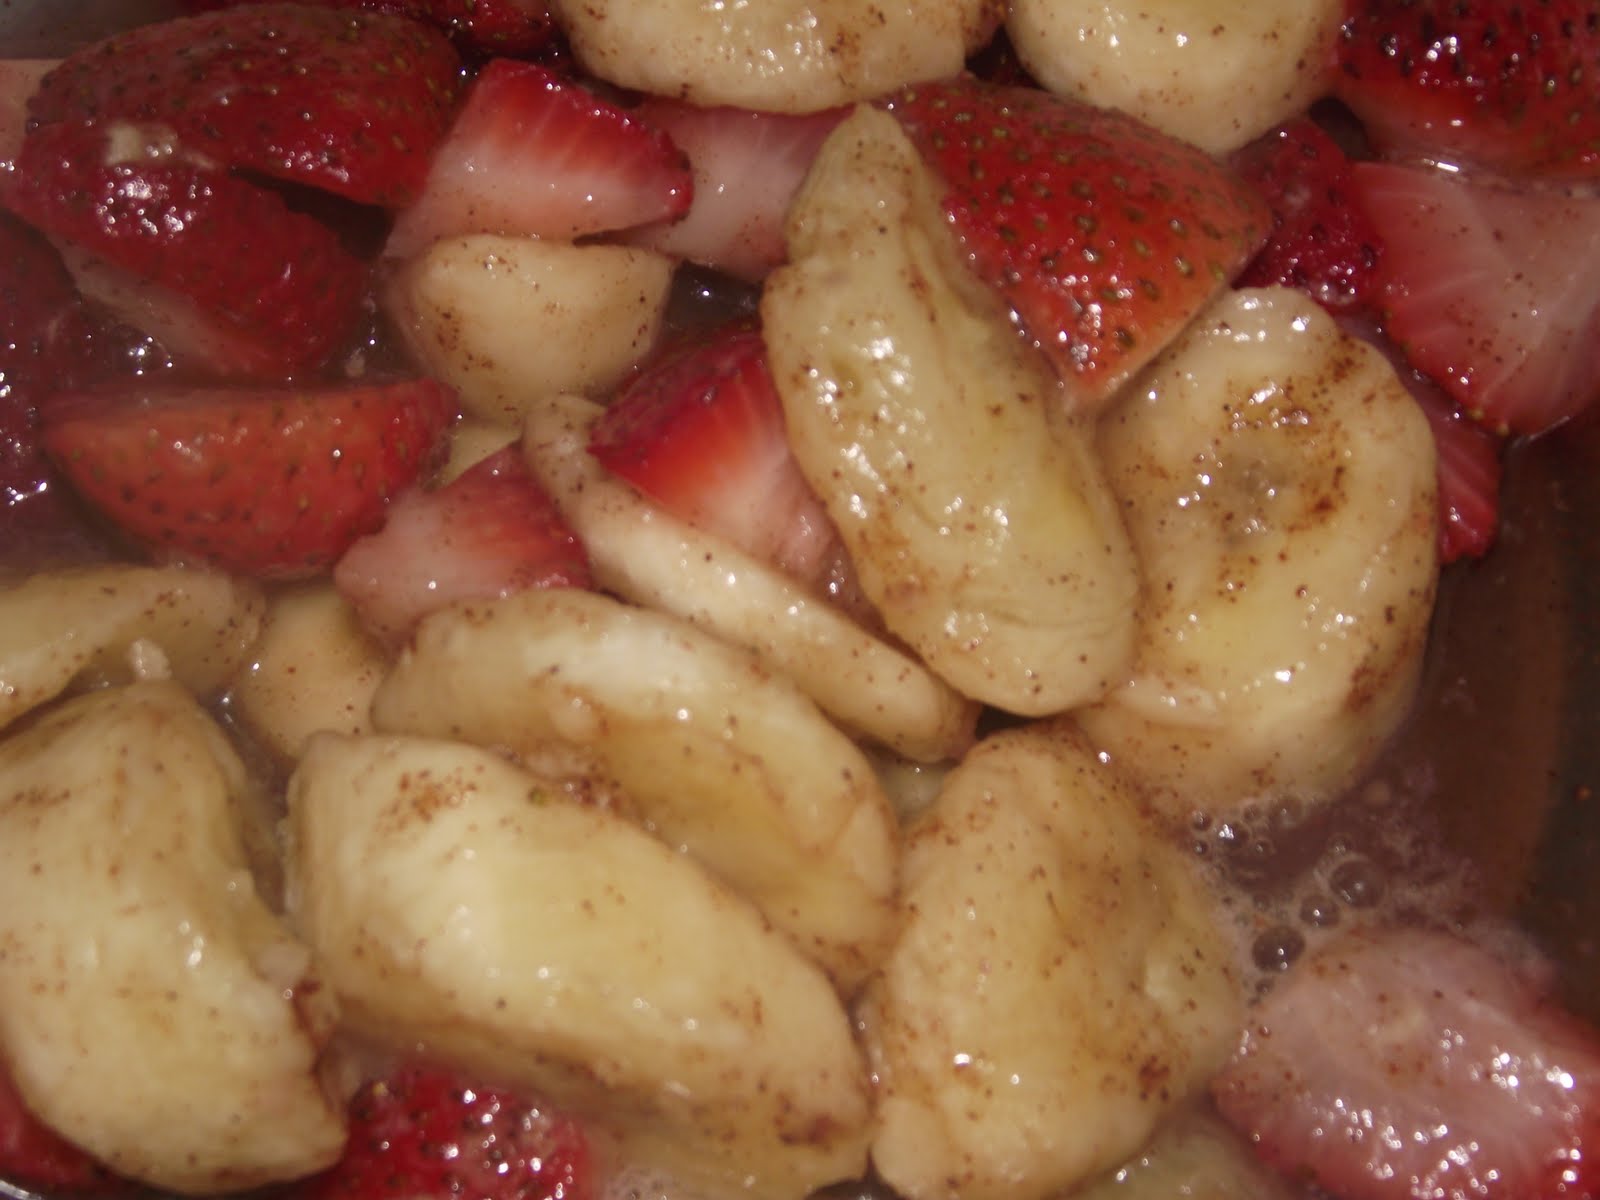 Tales from Astoria: Strawberry-Banana Crepes